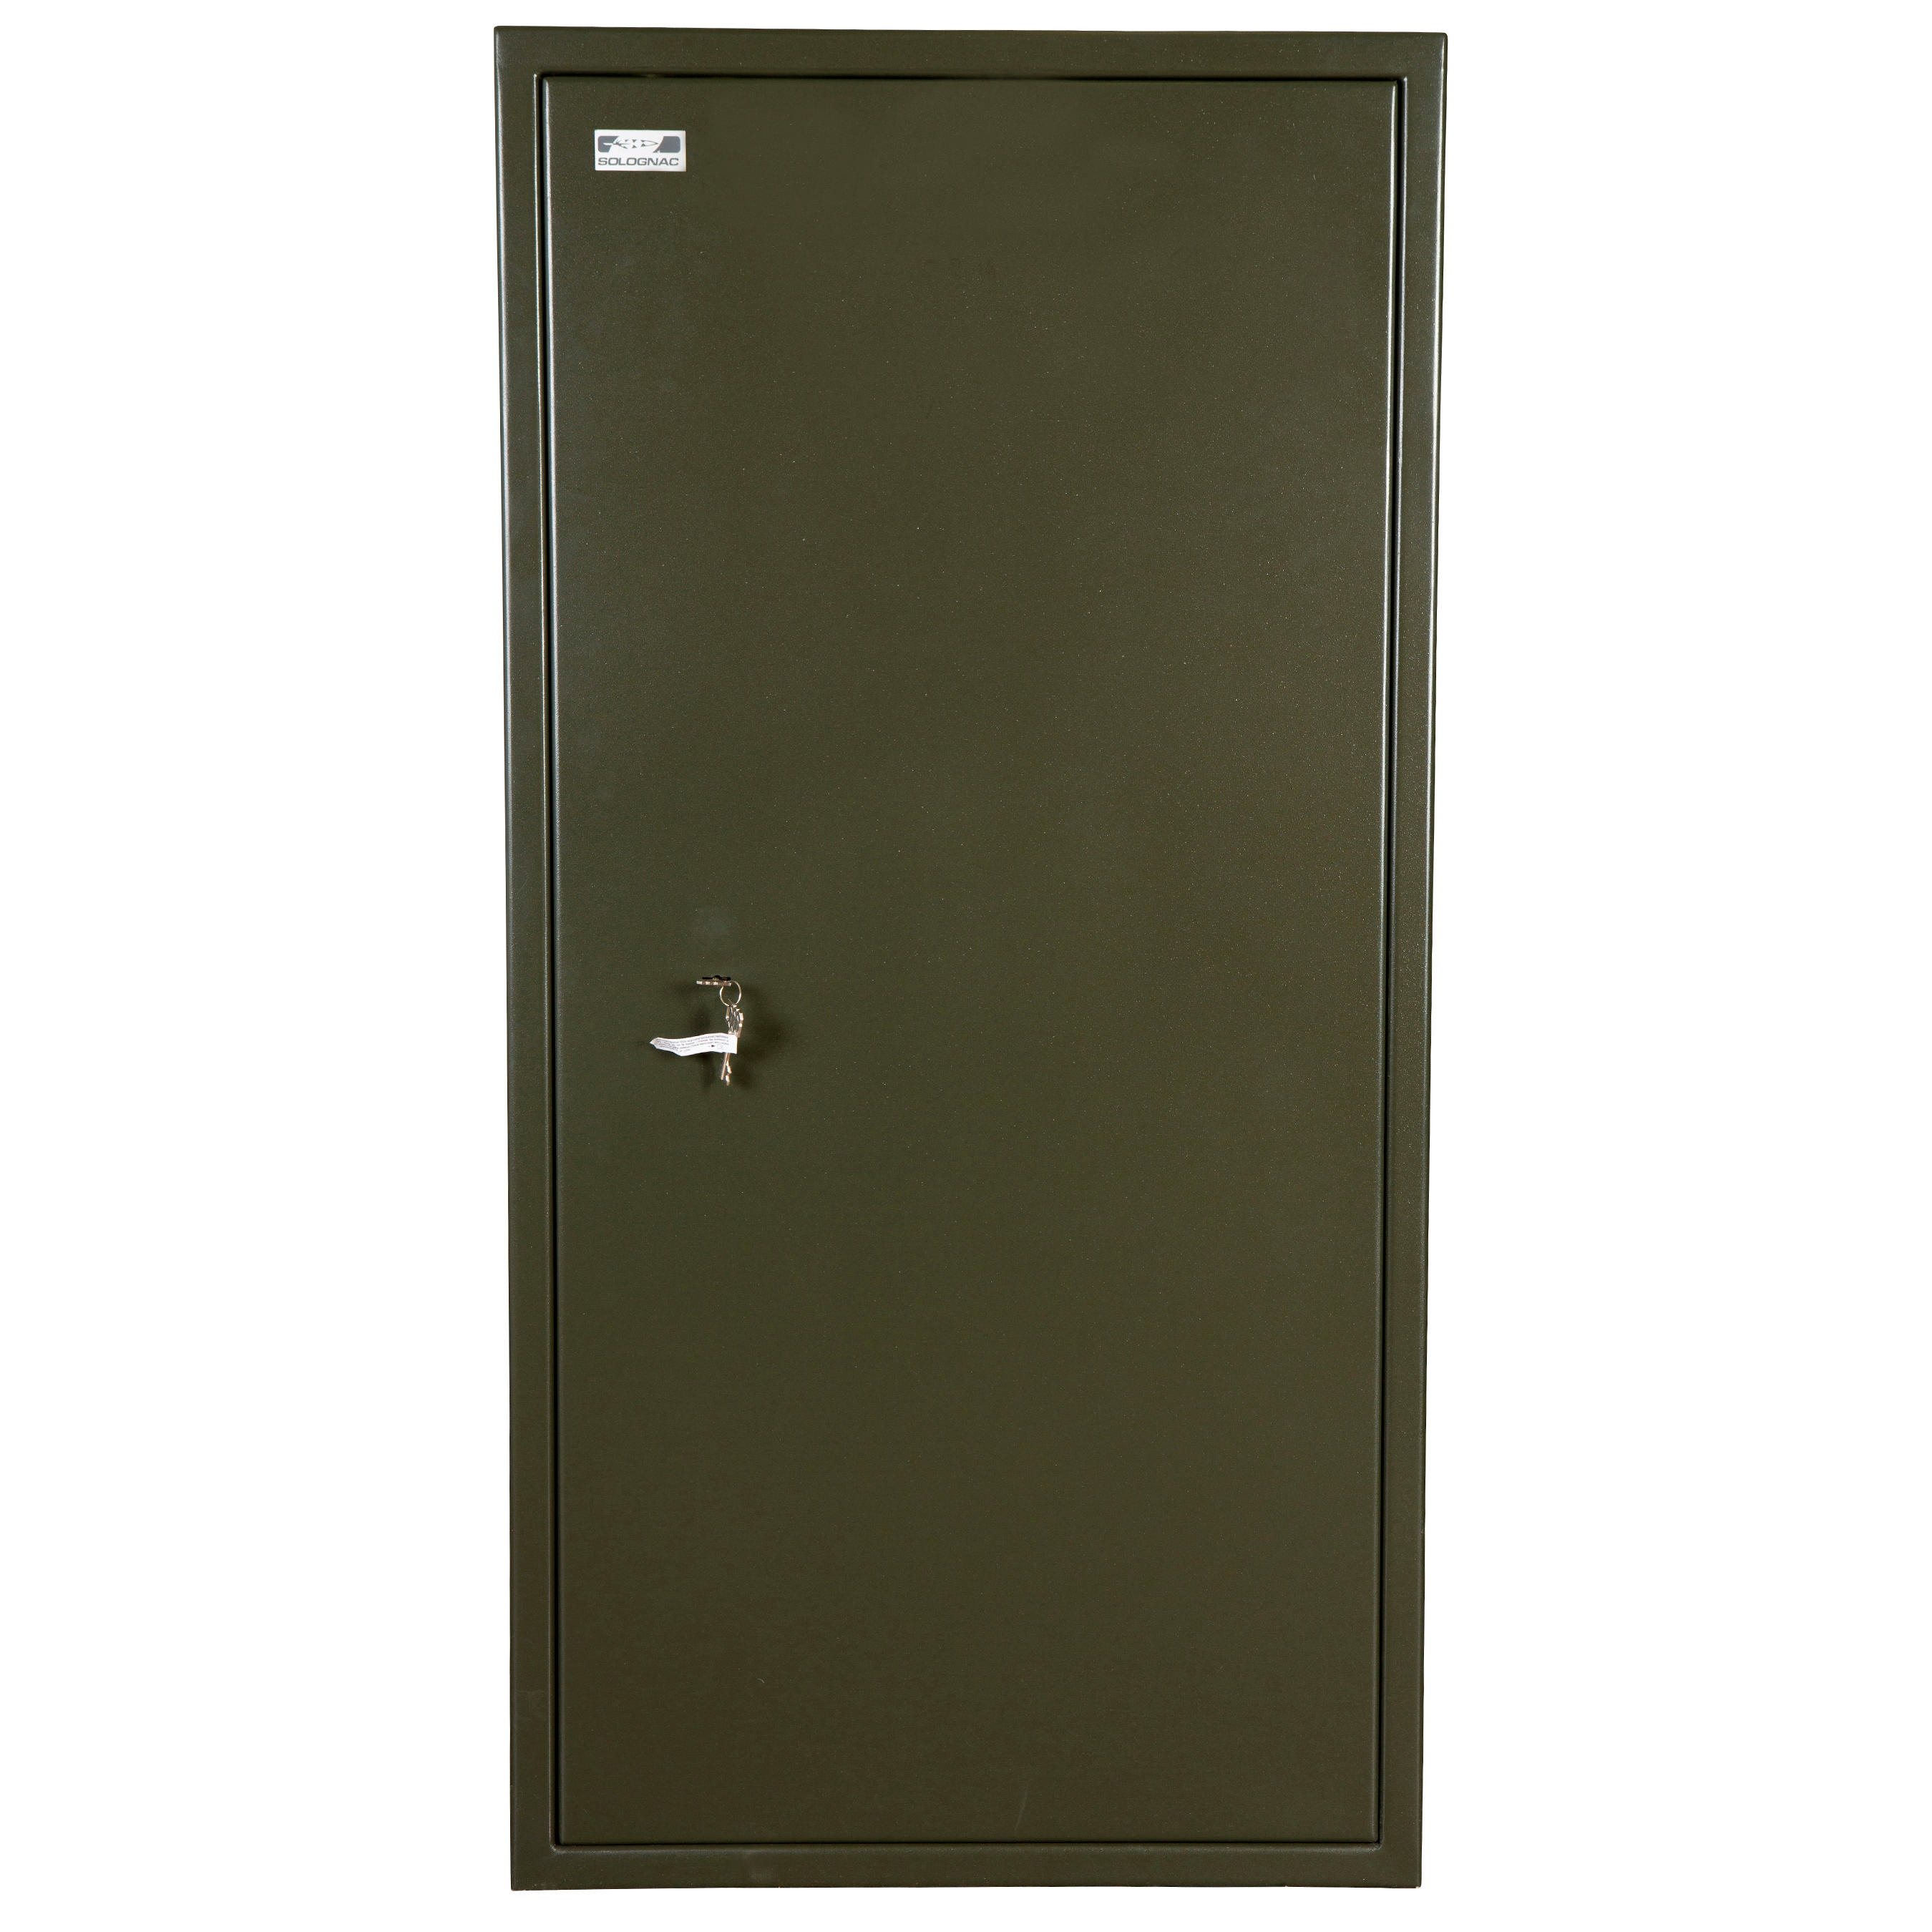 SOLOGNAC SAFETY CABINET 100-16